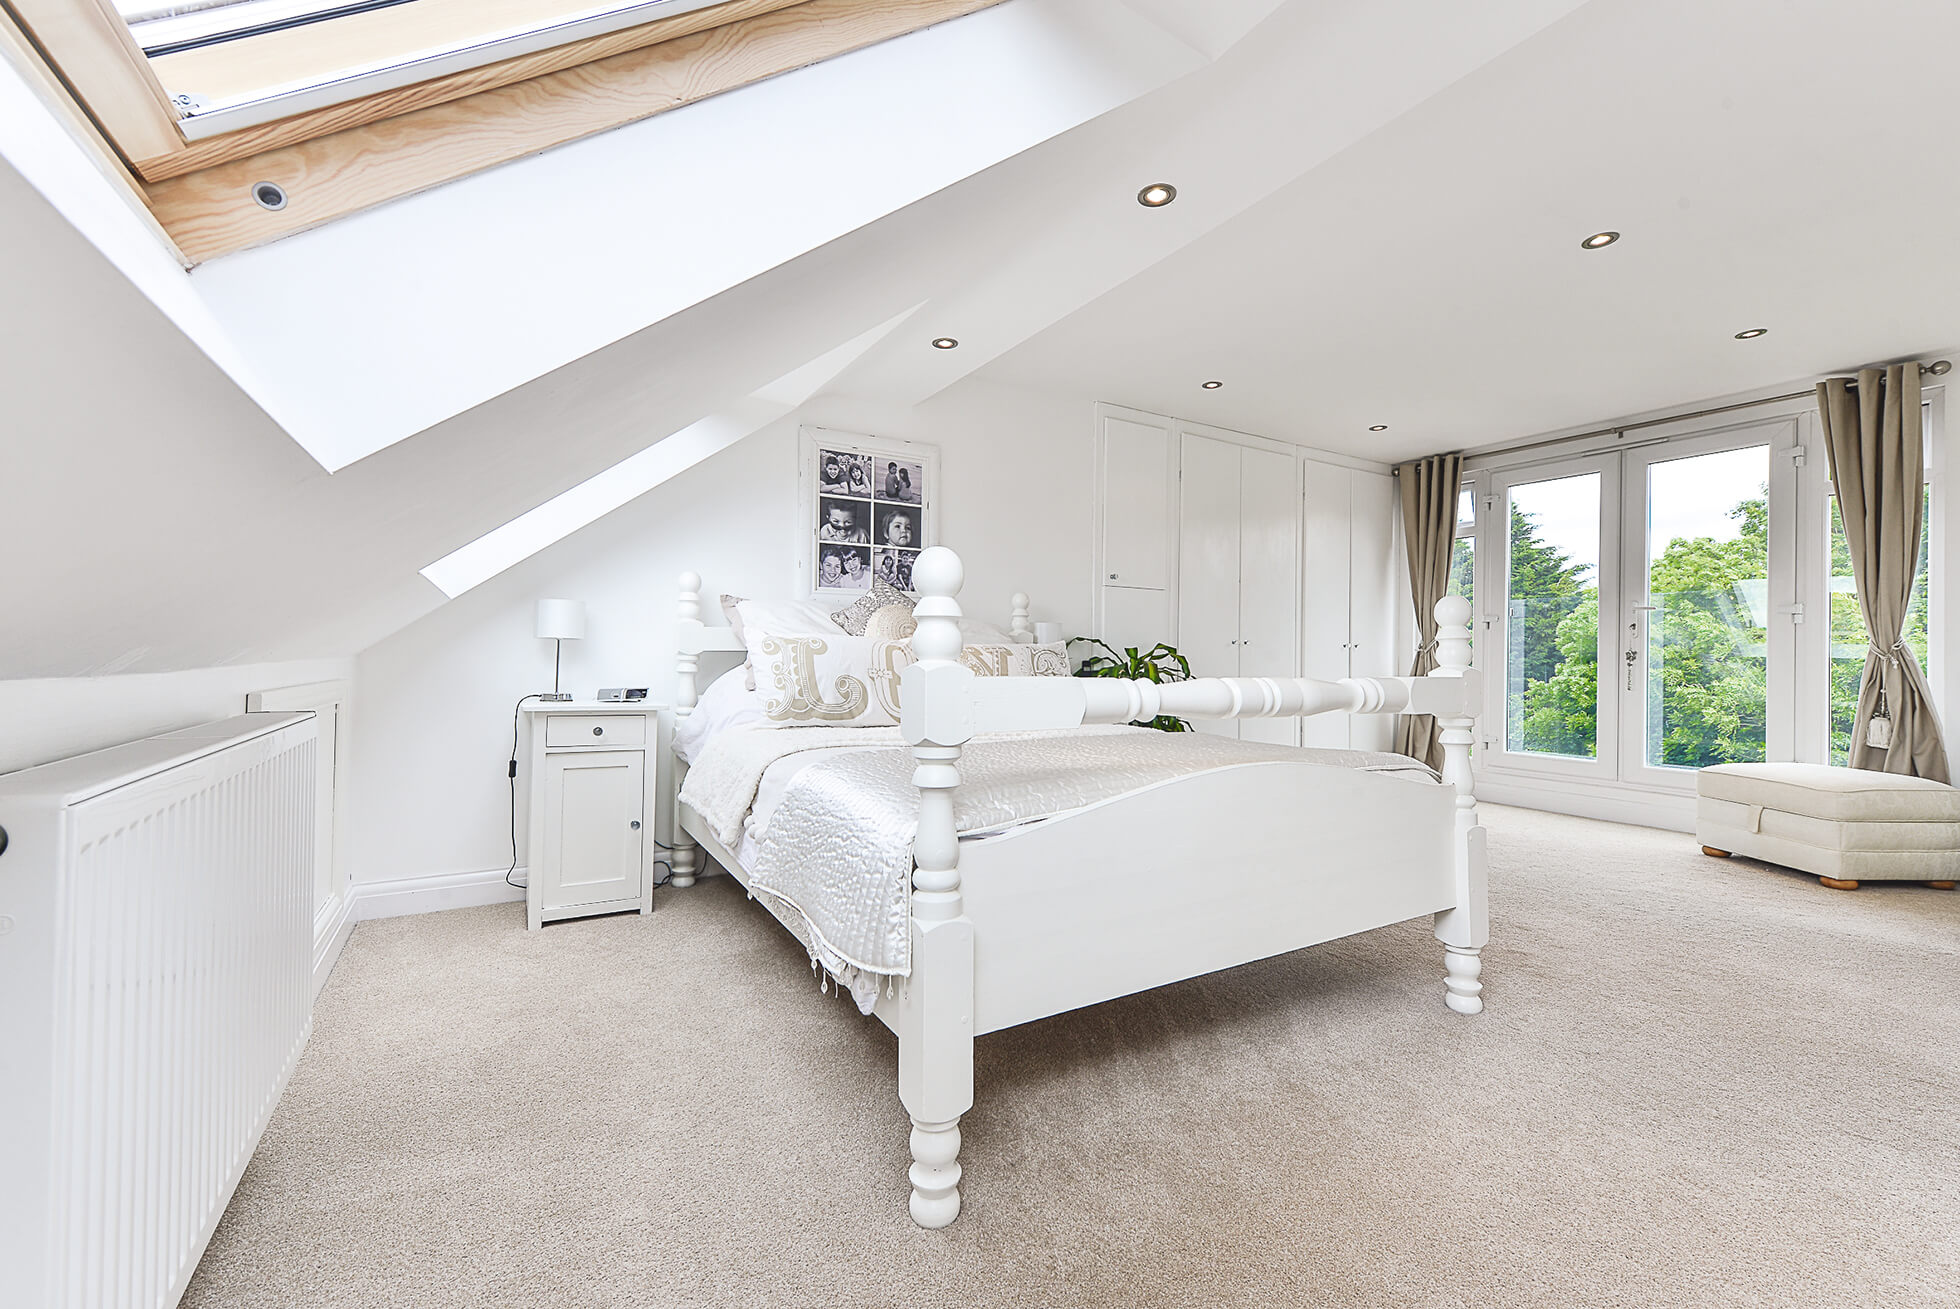 Do you have a question about converting your Loft in Hertford Heath? Here are the most popular questions asked by our clients.